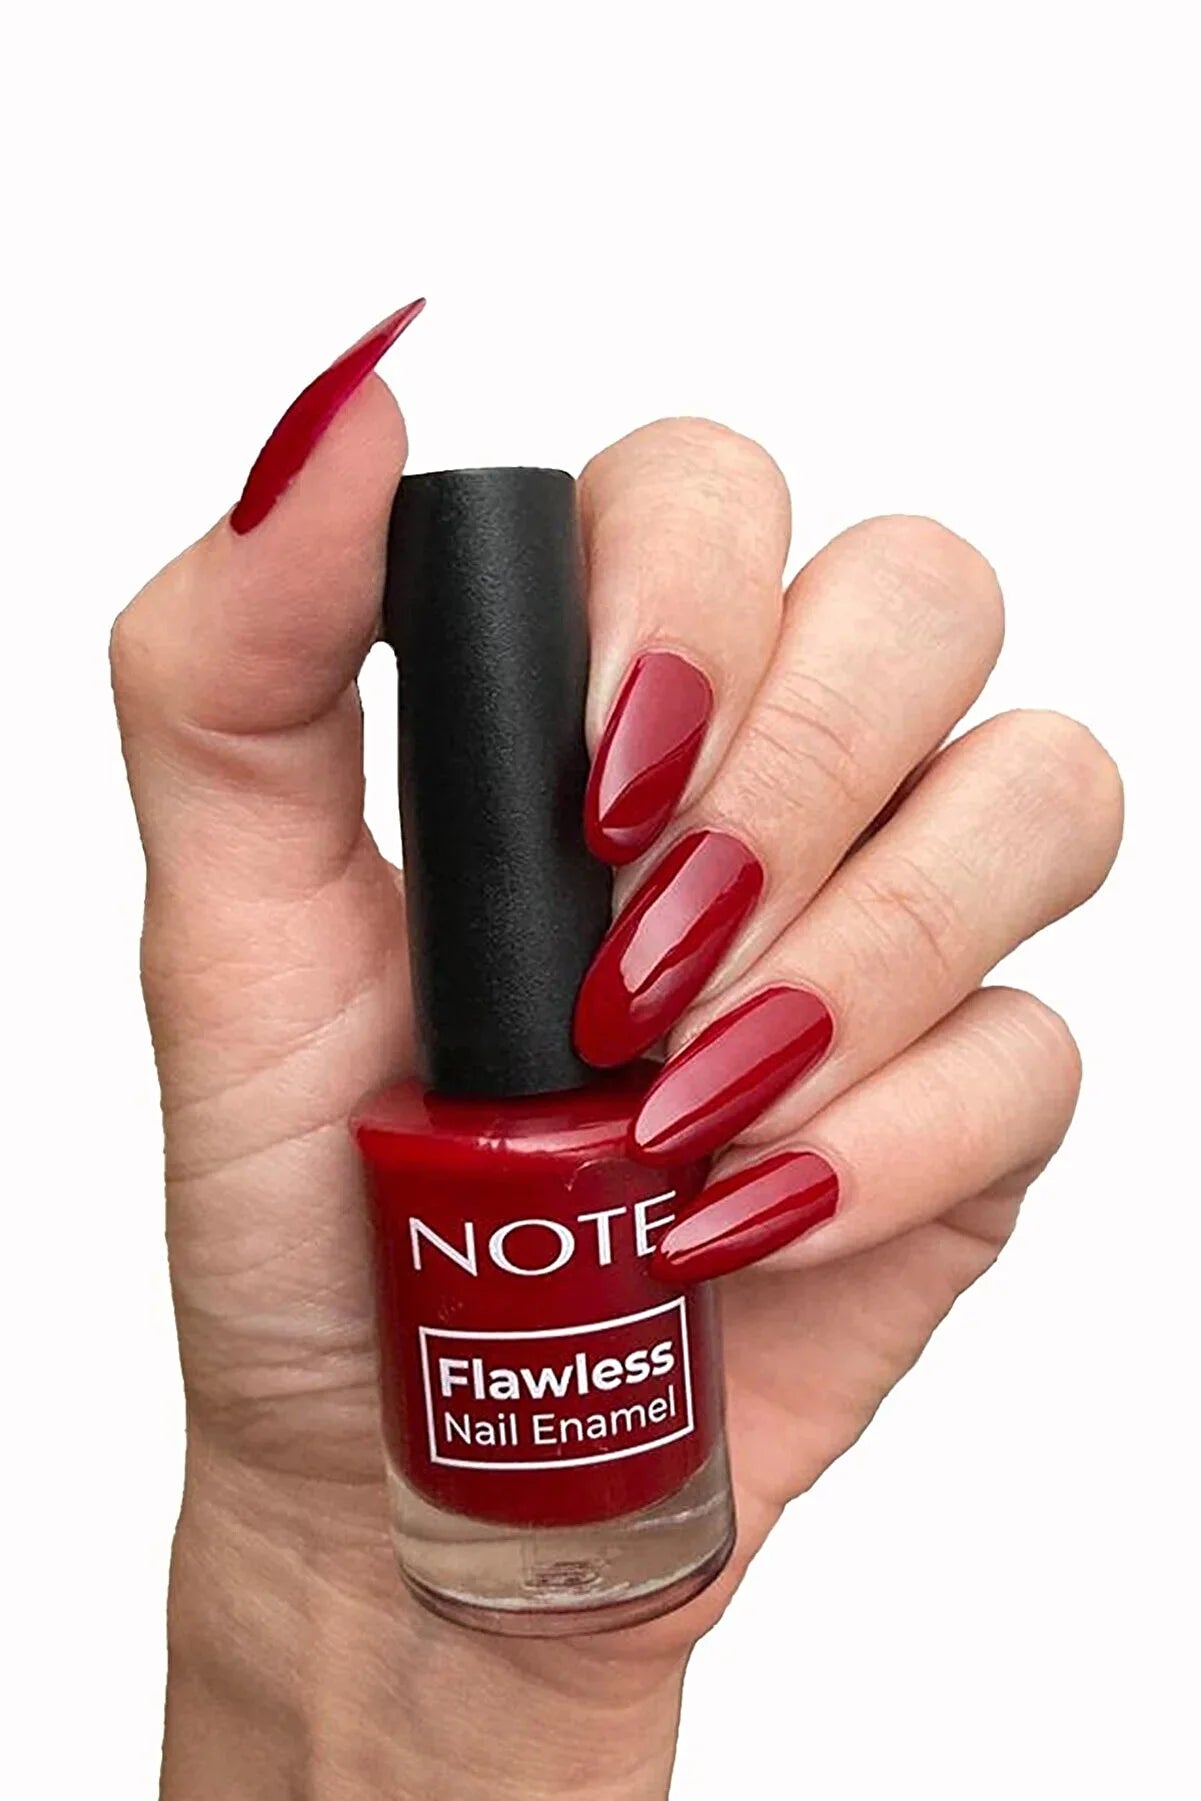 NOTE Flawless Nail Enamel- 35 Great Red 9ml